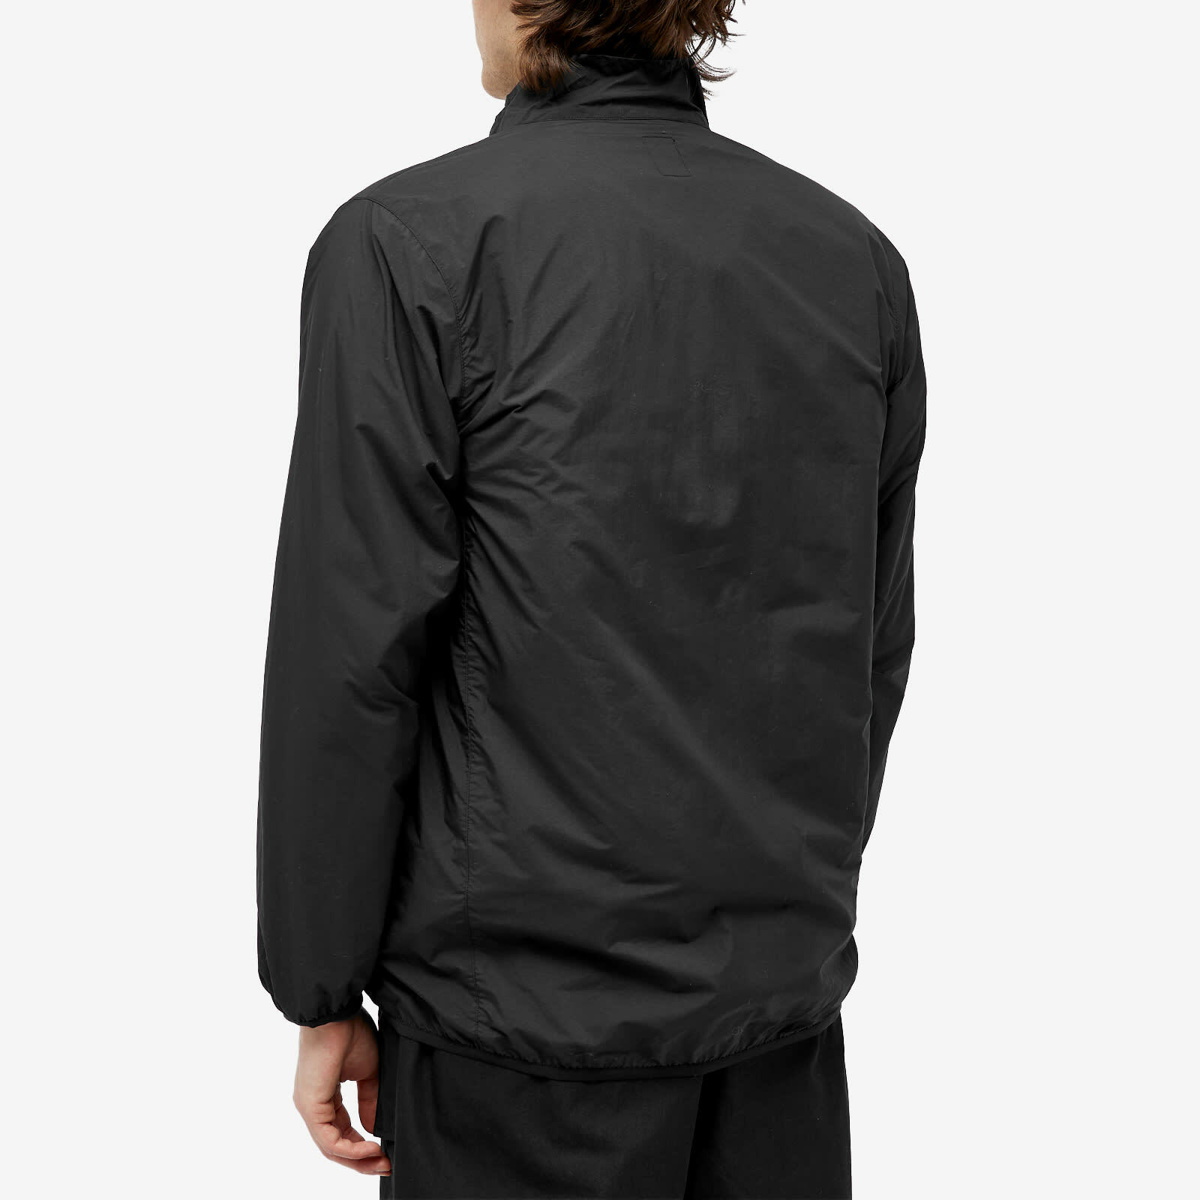 South2 West8 Men's Packable Nylon Typewriter Jacket in Black South2 West8